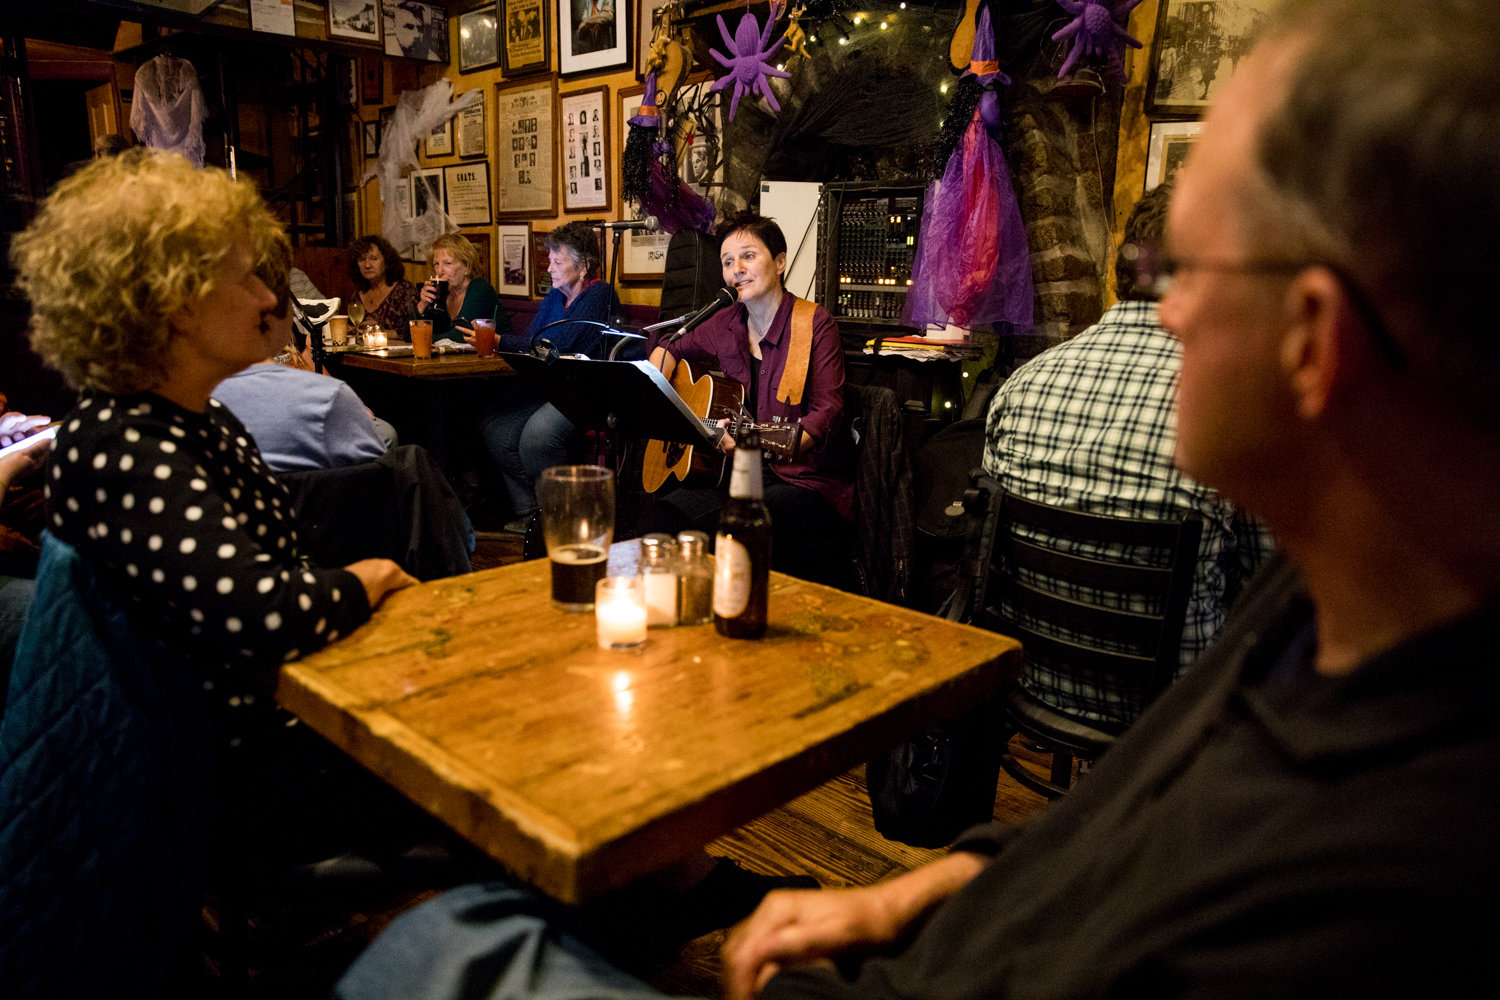 Music fills the space at An Beal Bocht Café every Friday night, which regularly hosts a variety of musical and cultural events, including poetry and theatre.